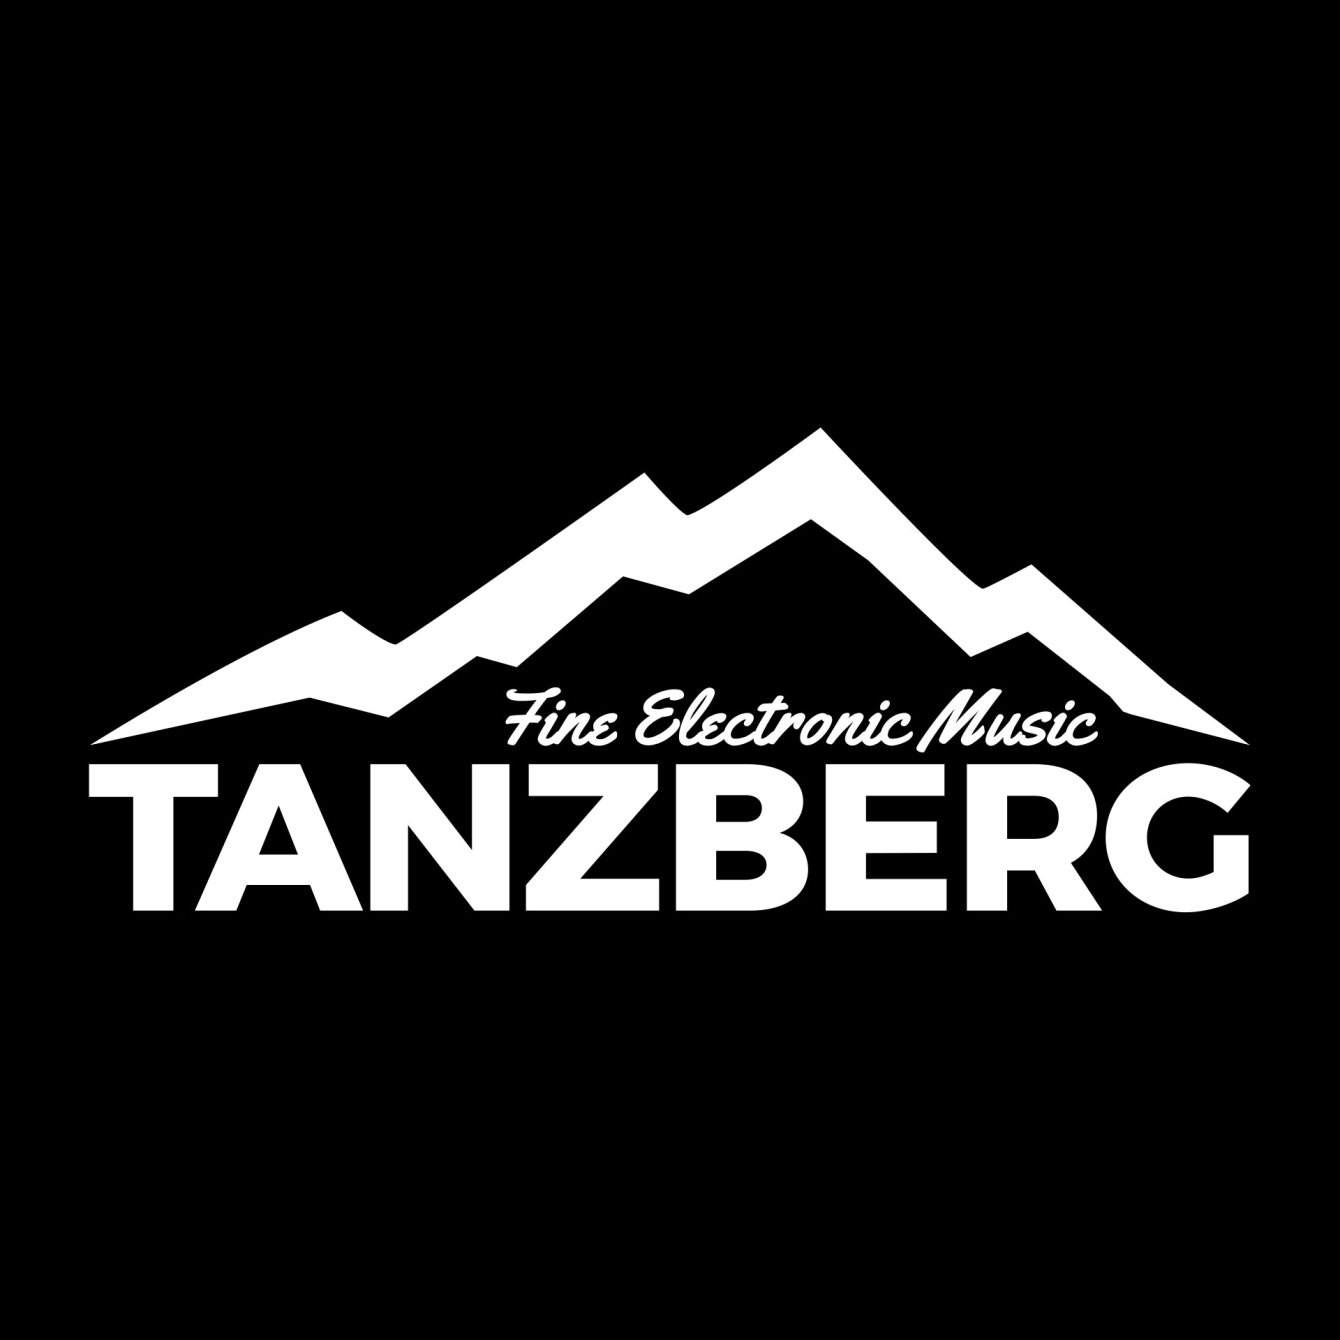 Tanzberg After Party - フライヤー表